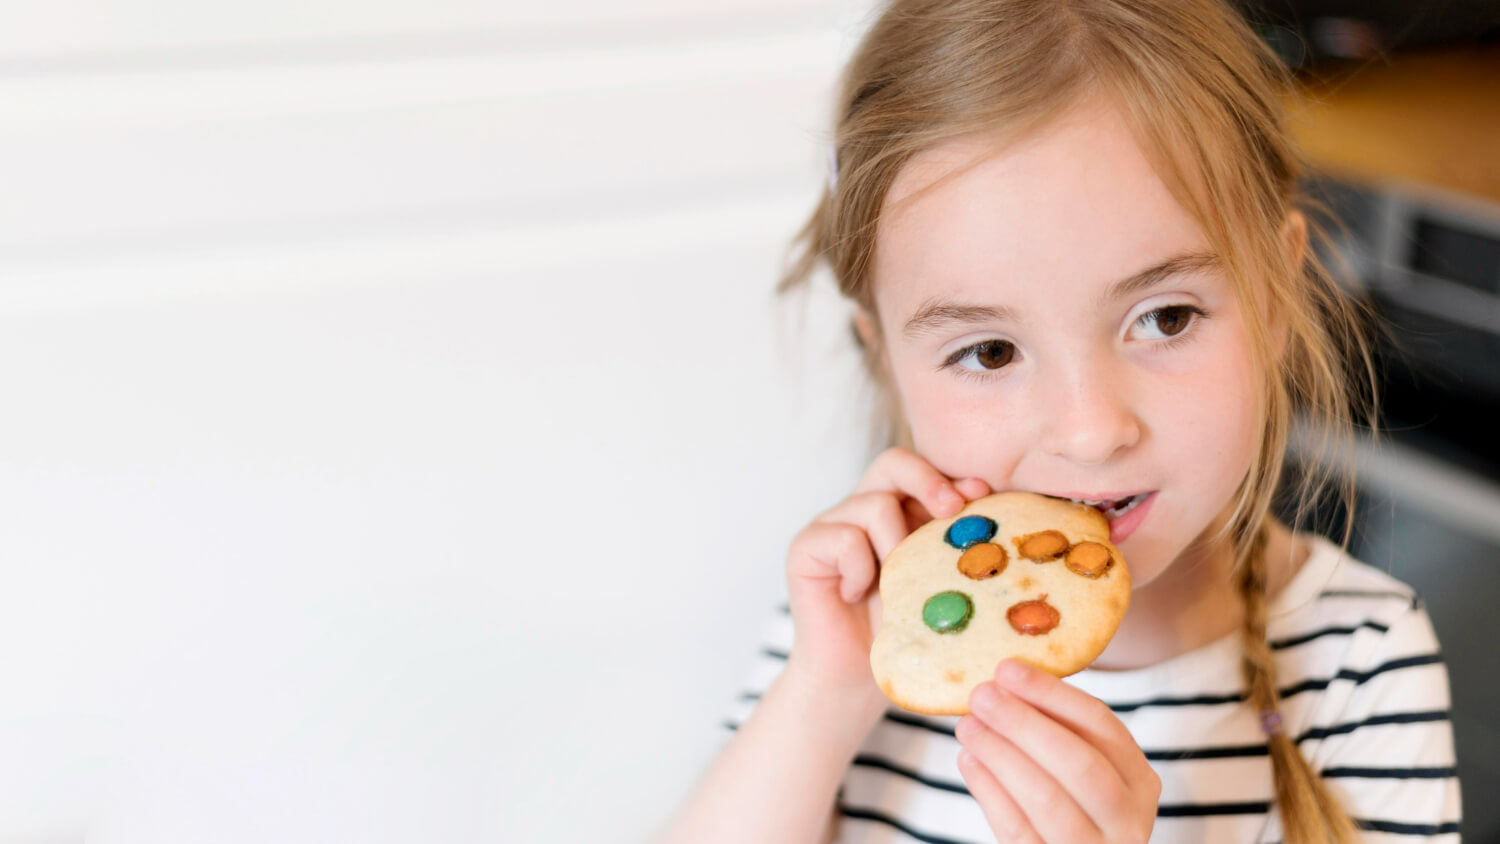 A young girl biting into a cookie.